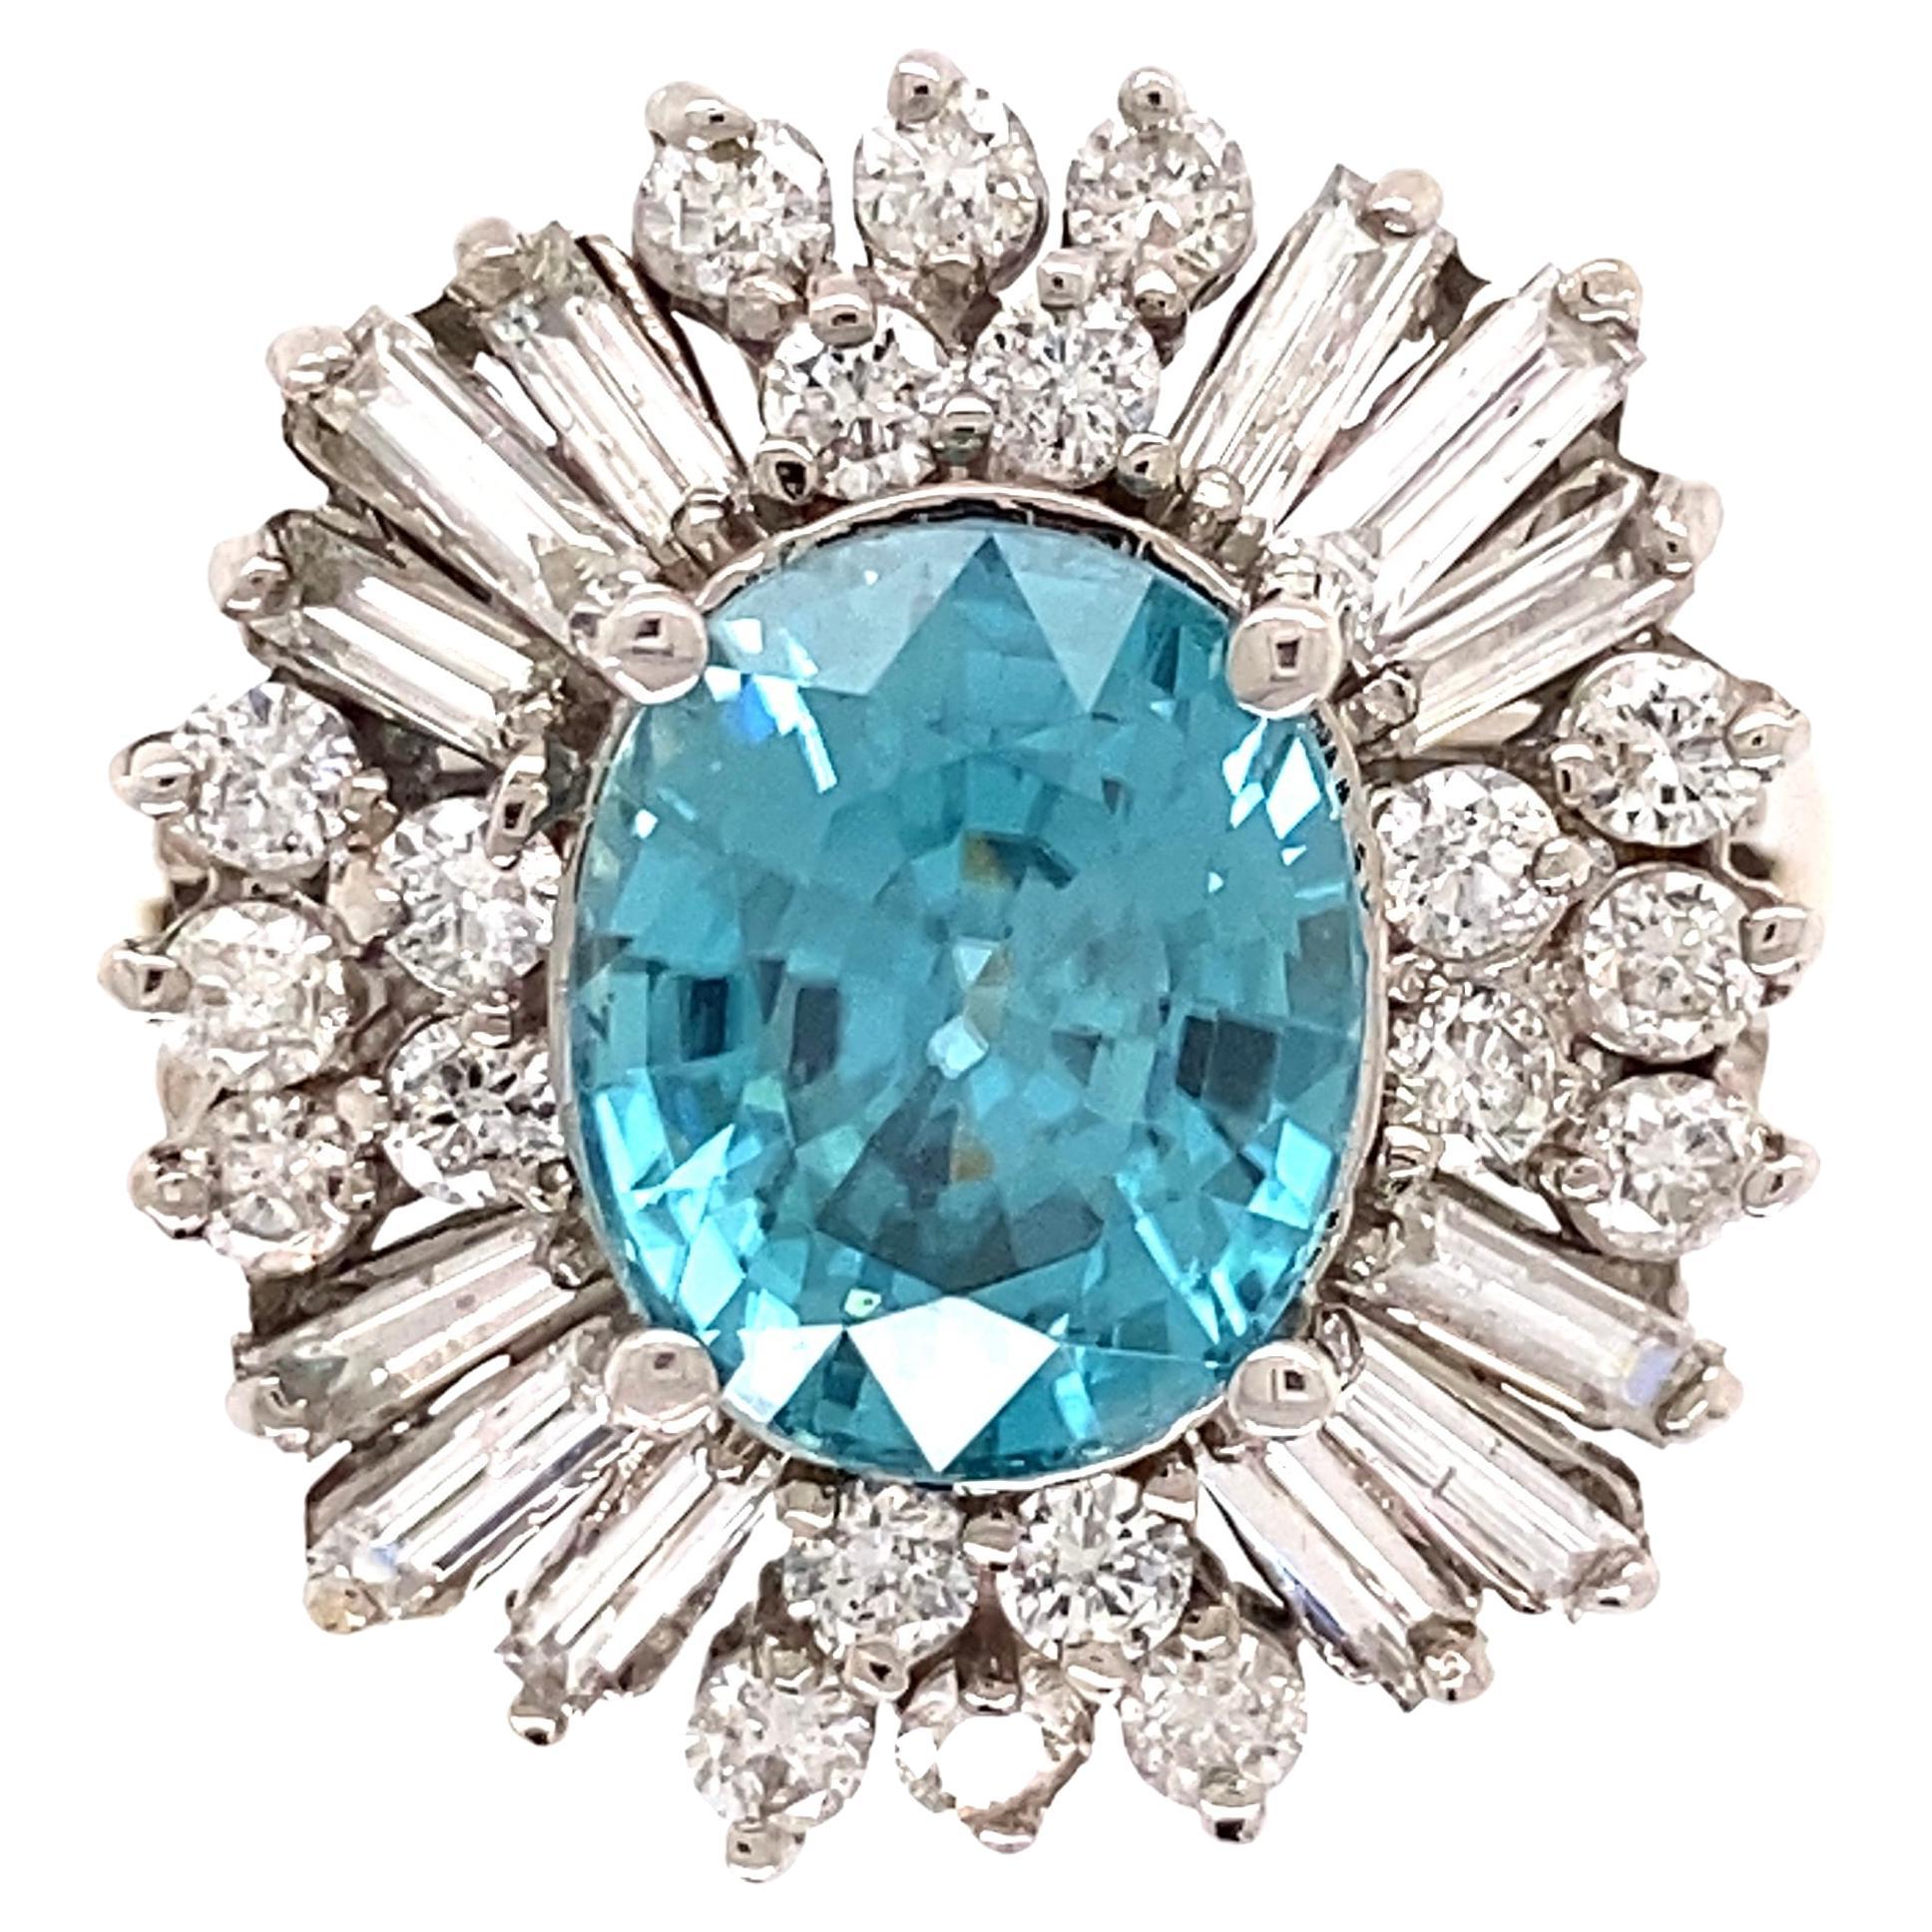 4.50 Carat Blue Zircon and Diamond Cocktail Ring Estate Fine Jewelry For Sale